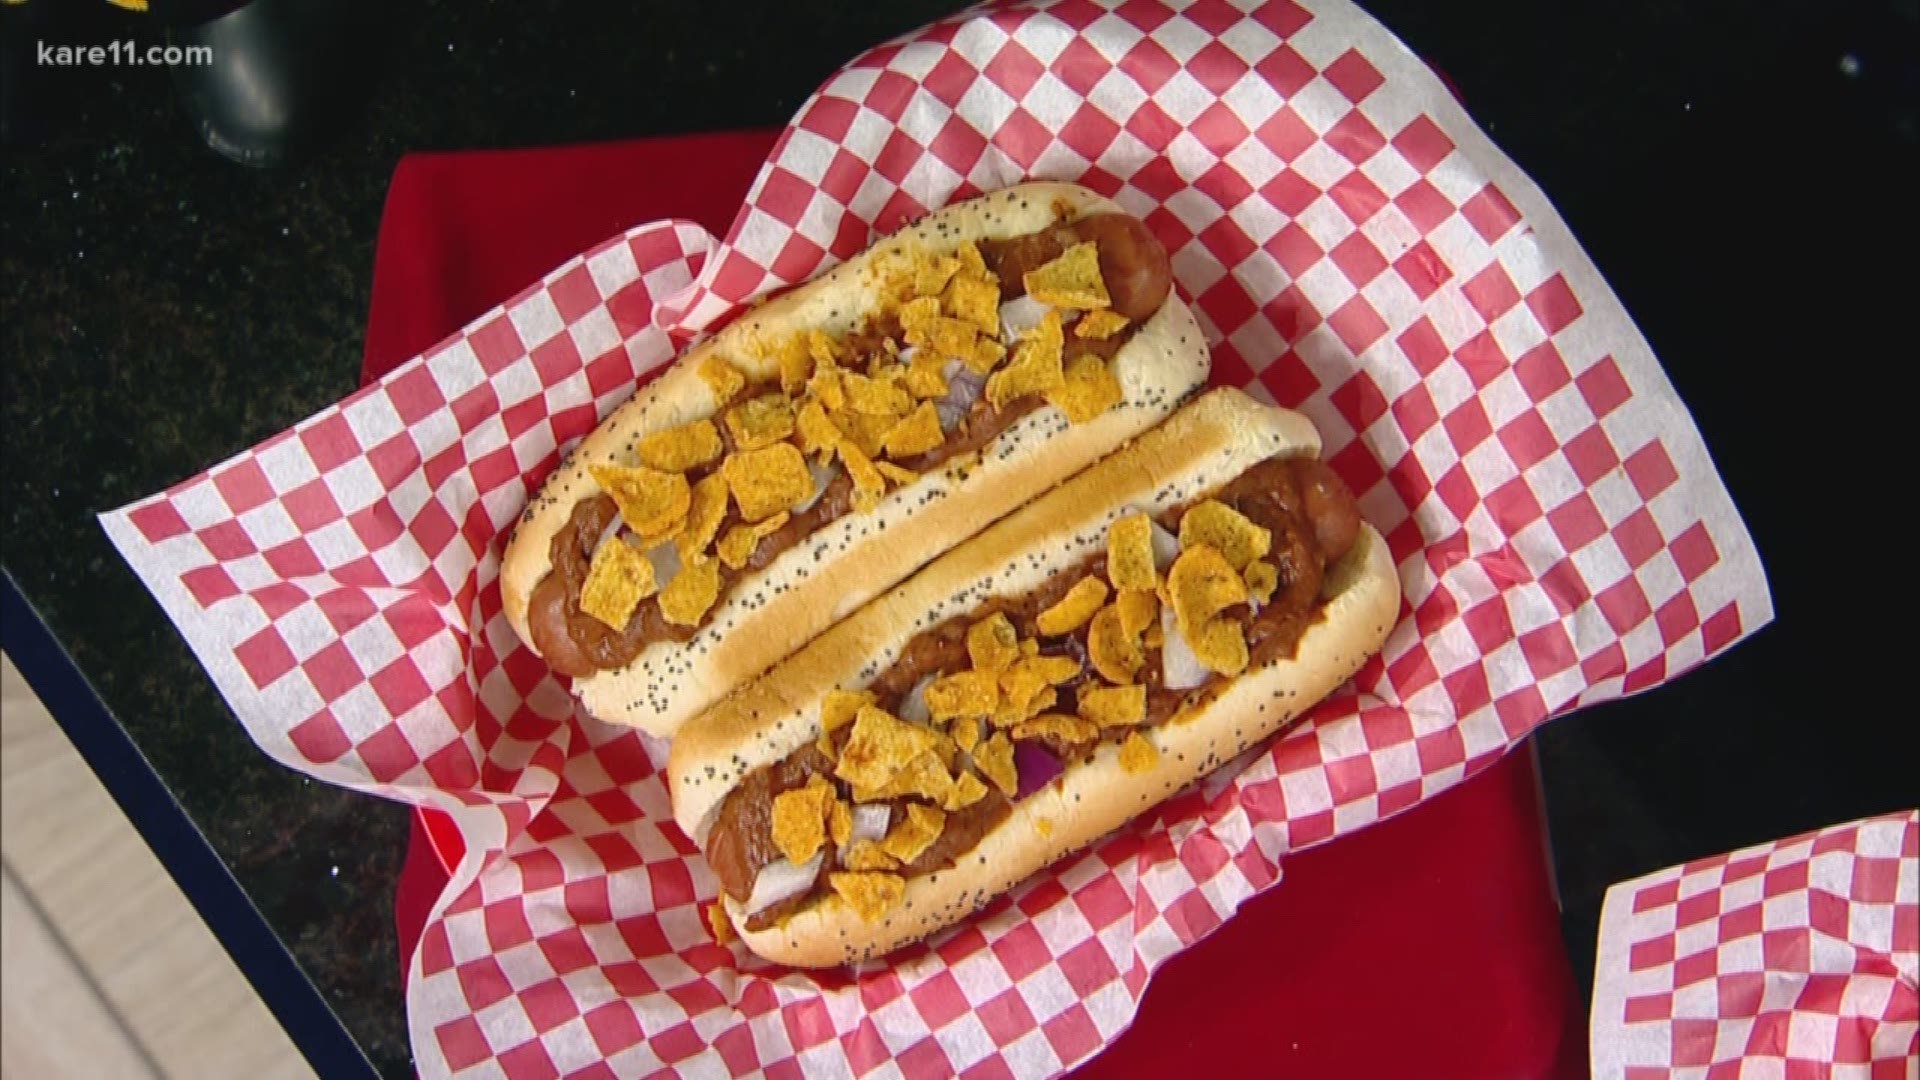 Rob Dubnecay of Chicago’s Taste Authority stopped by to talk about fun ways to decorate your hot dogs.